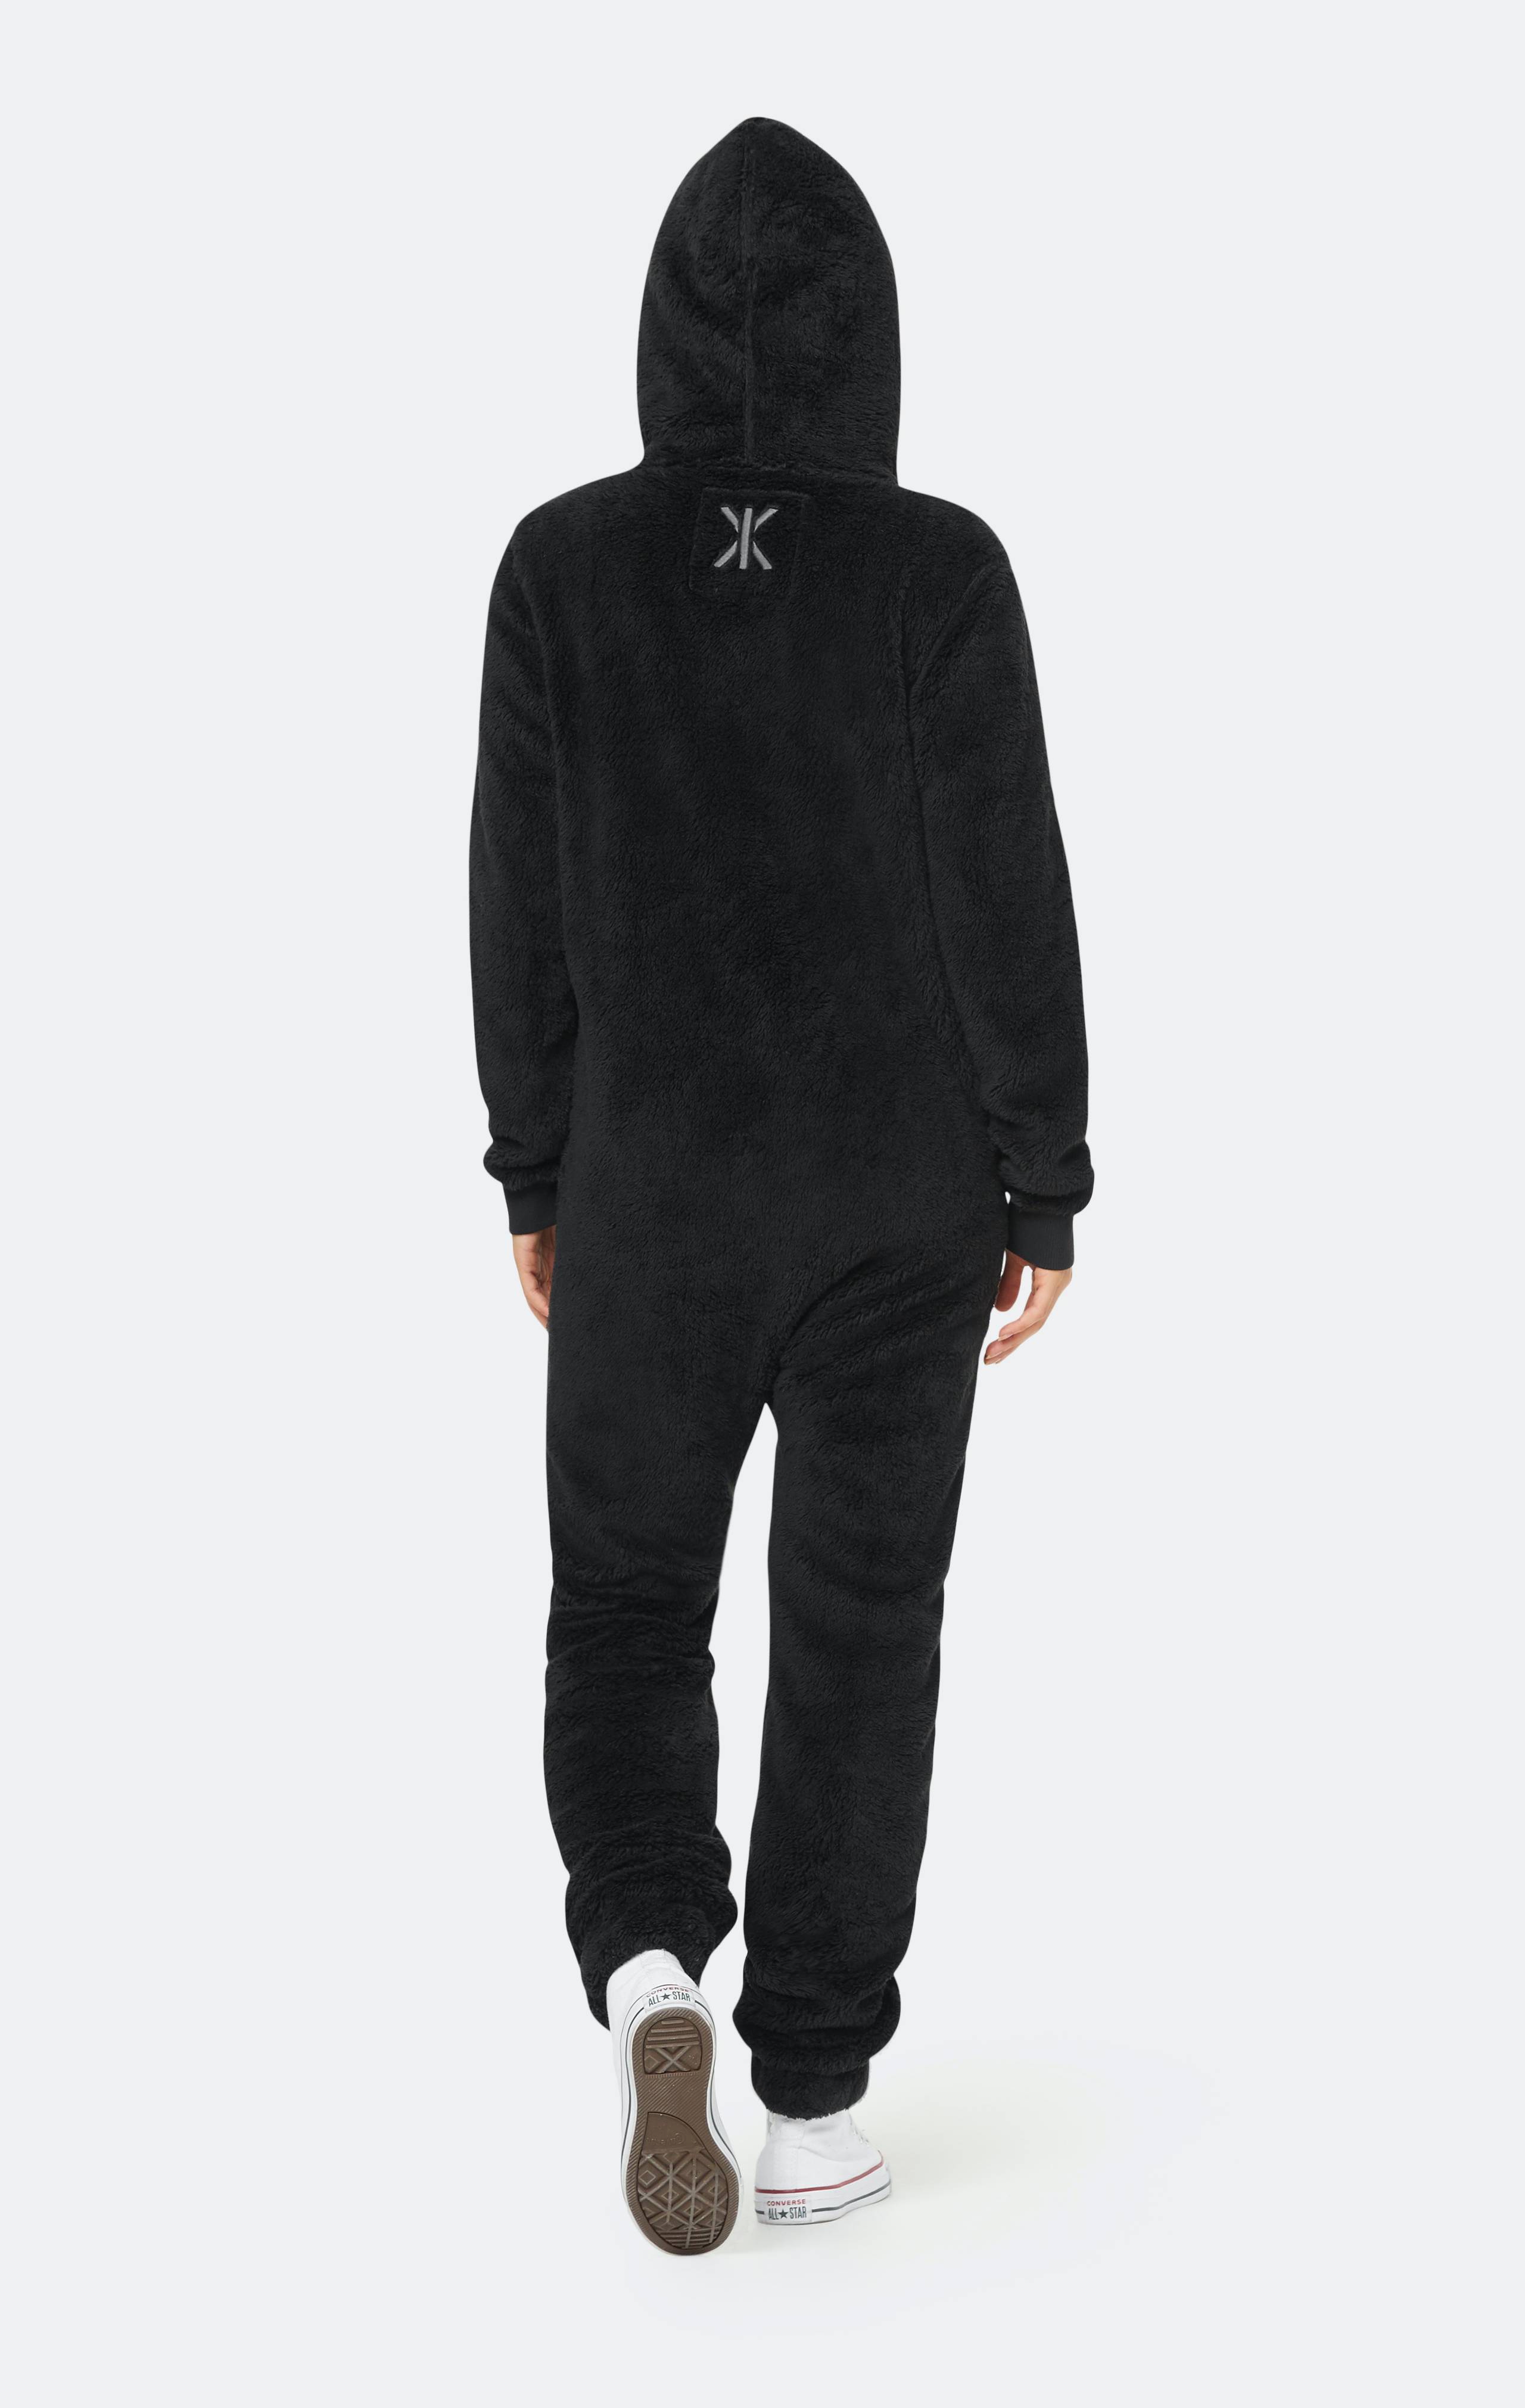 Onepiece The New Puppy Jumpsuit Black - 8